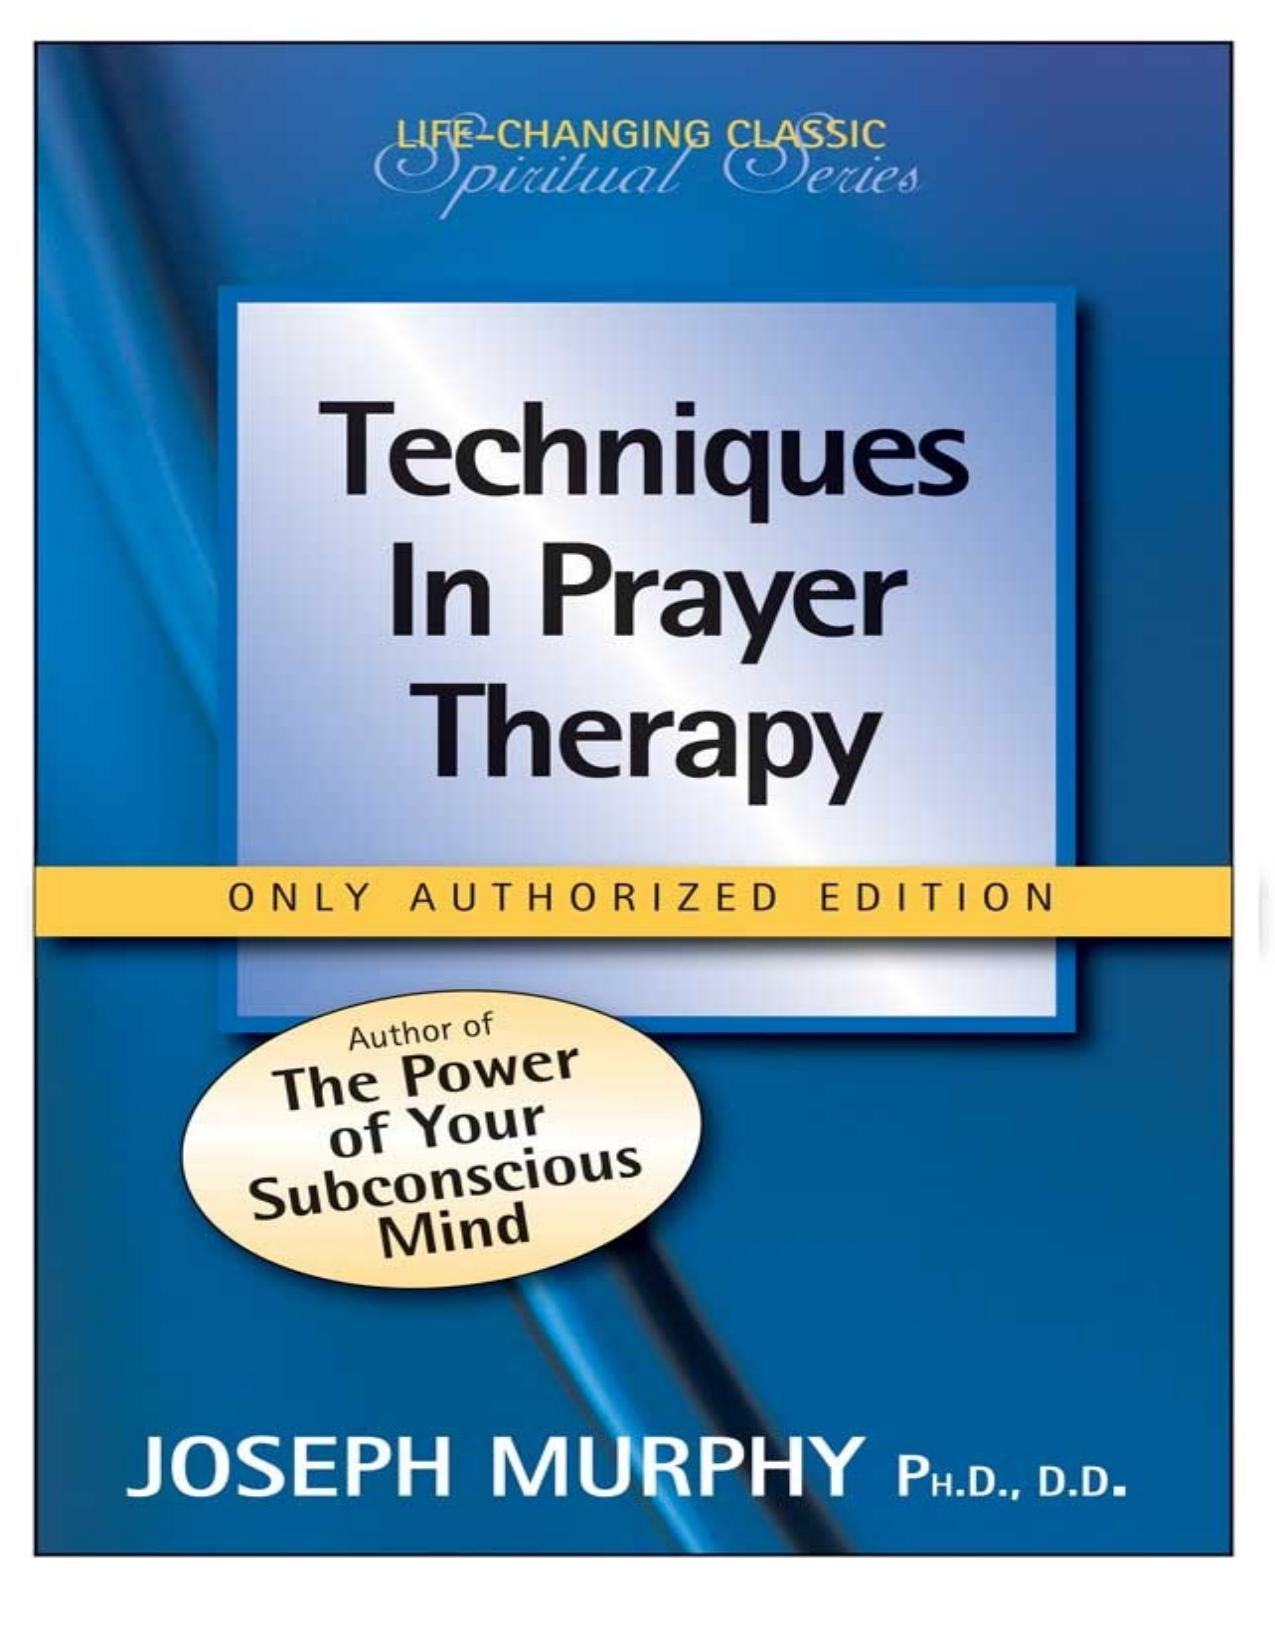 Techniques in Prayer Therapy by Joseph Murphy